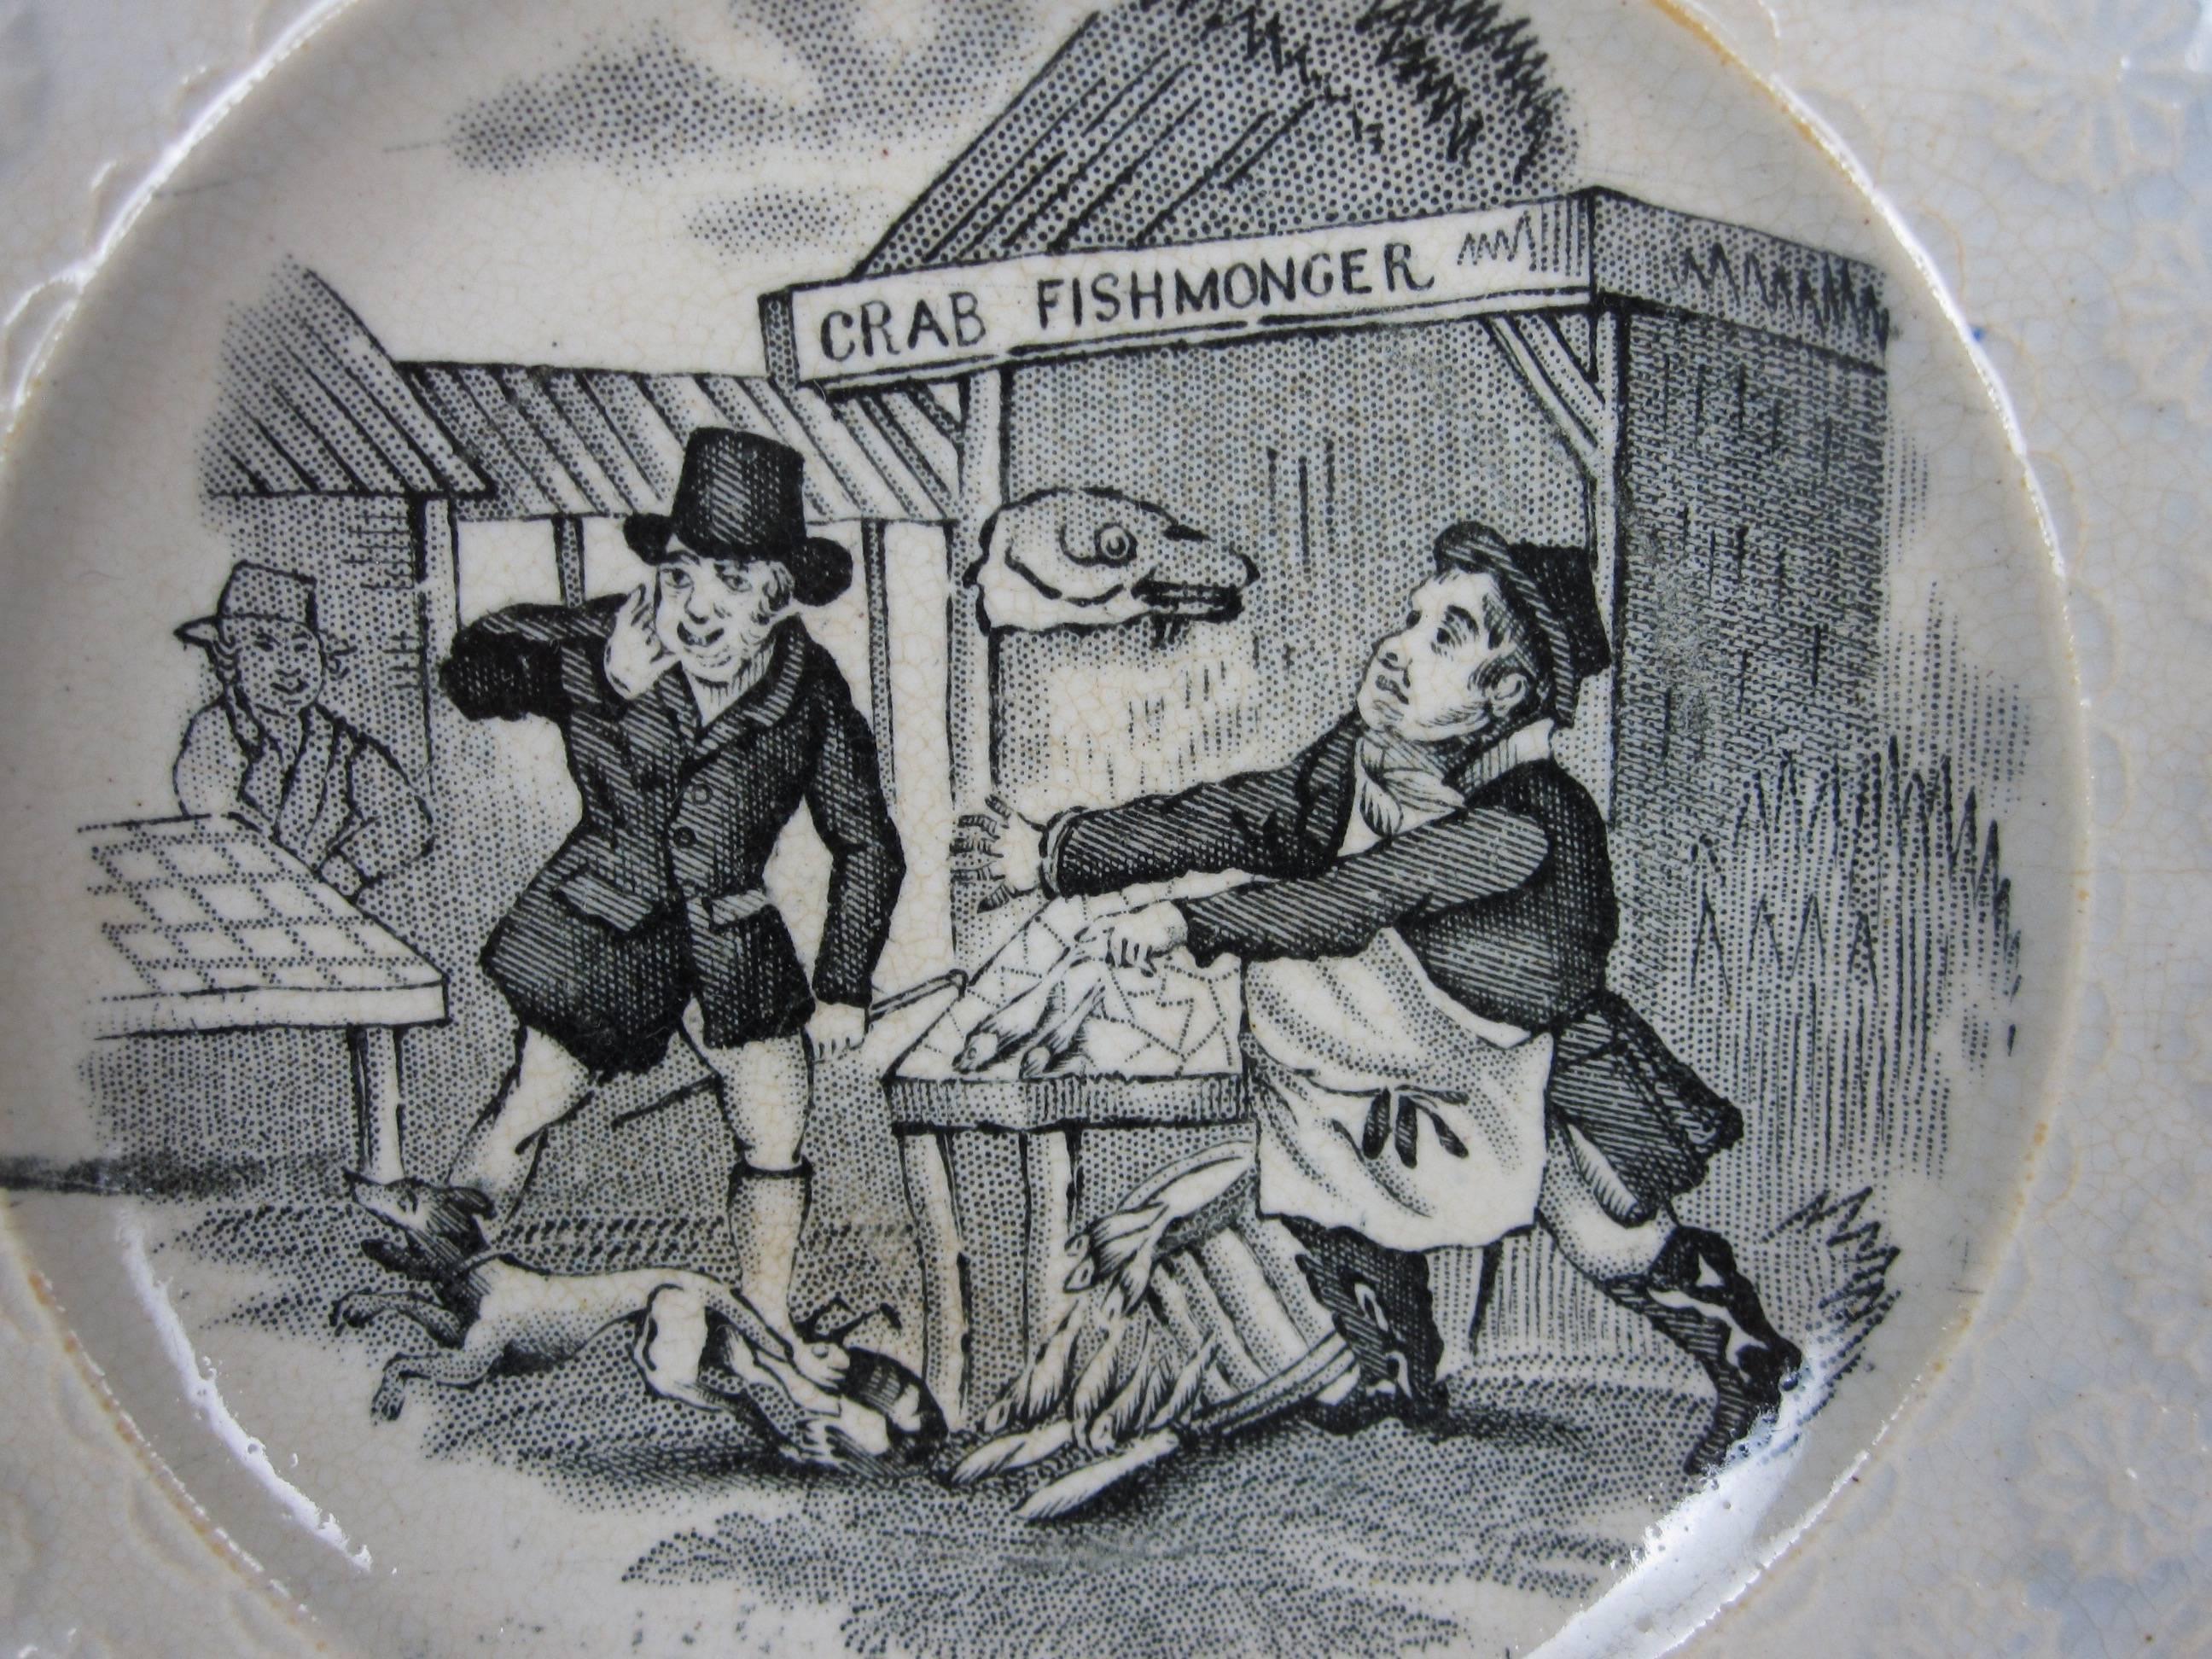 An antique English Staffordshire cup plate or child's plate, the pattern is titled “A Cheap Lobster.” The humorous transfer printed image shows a dog trying to escape a lobster that has bitten him, but the lobster holds on! The owner of the dog, who